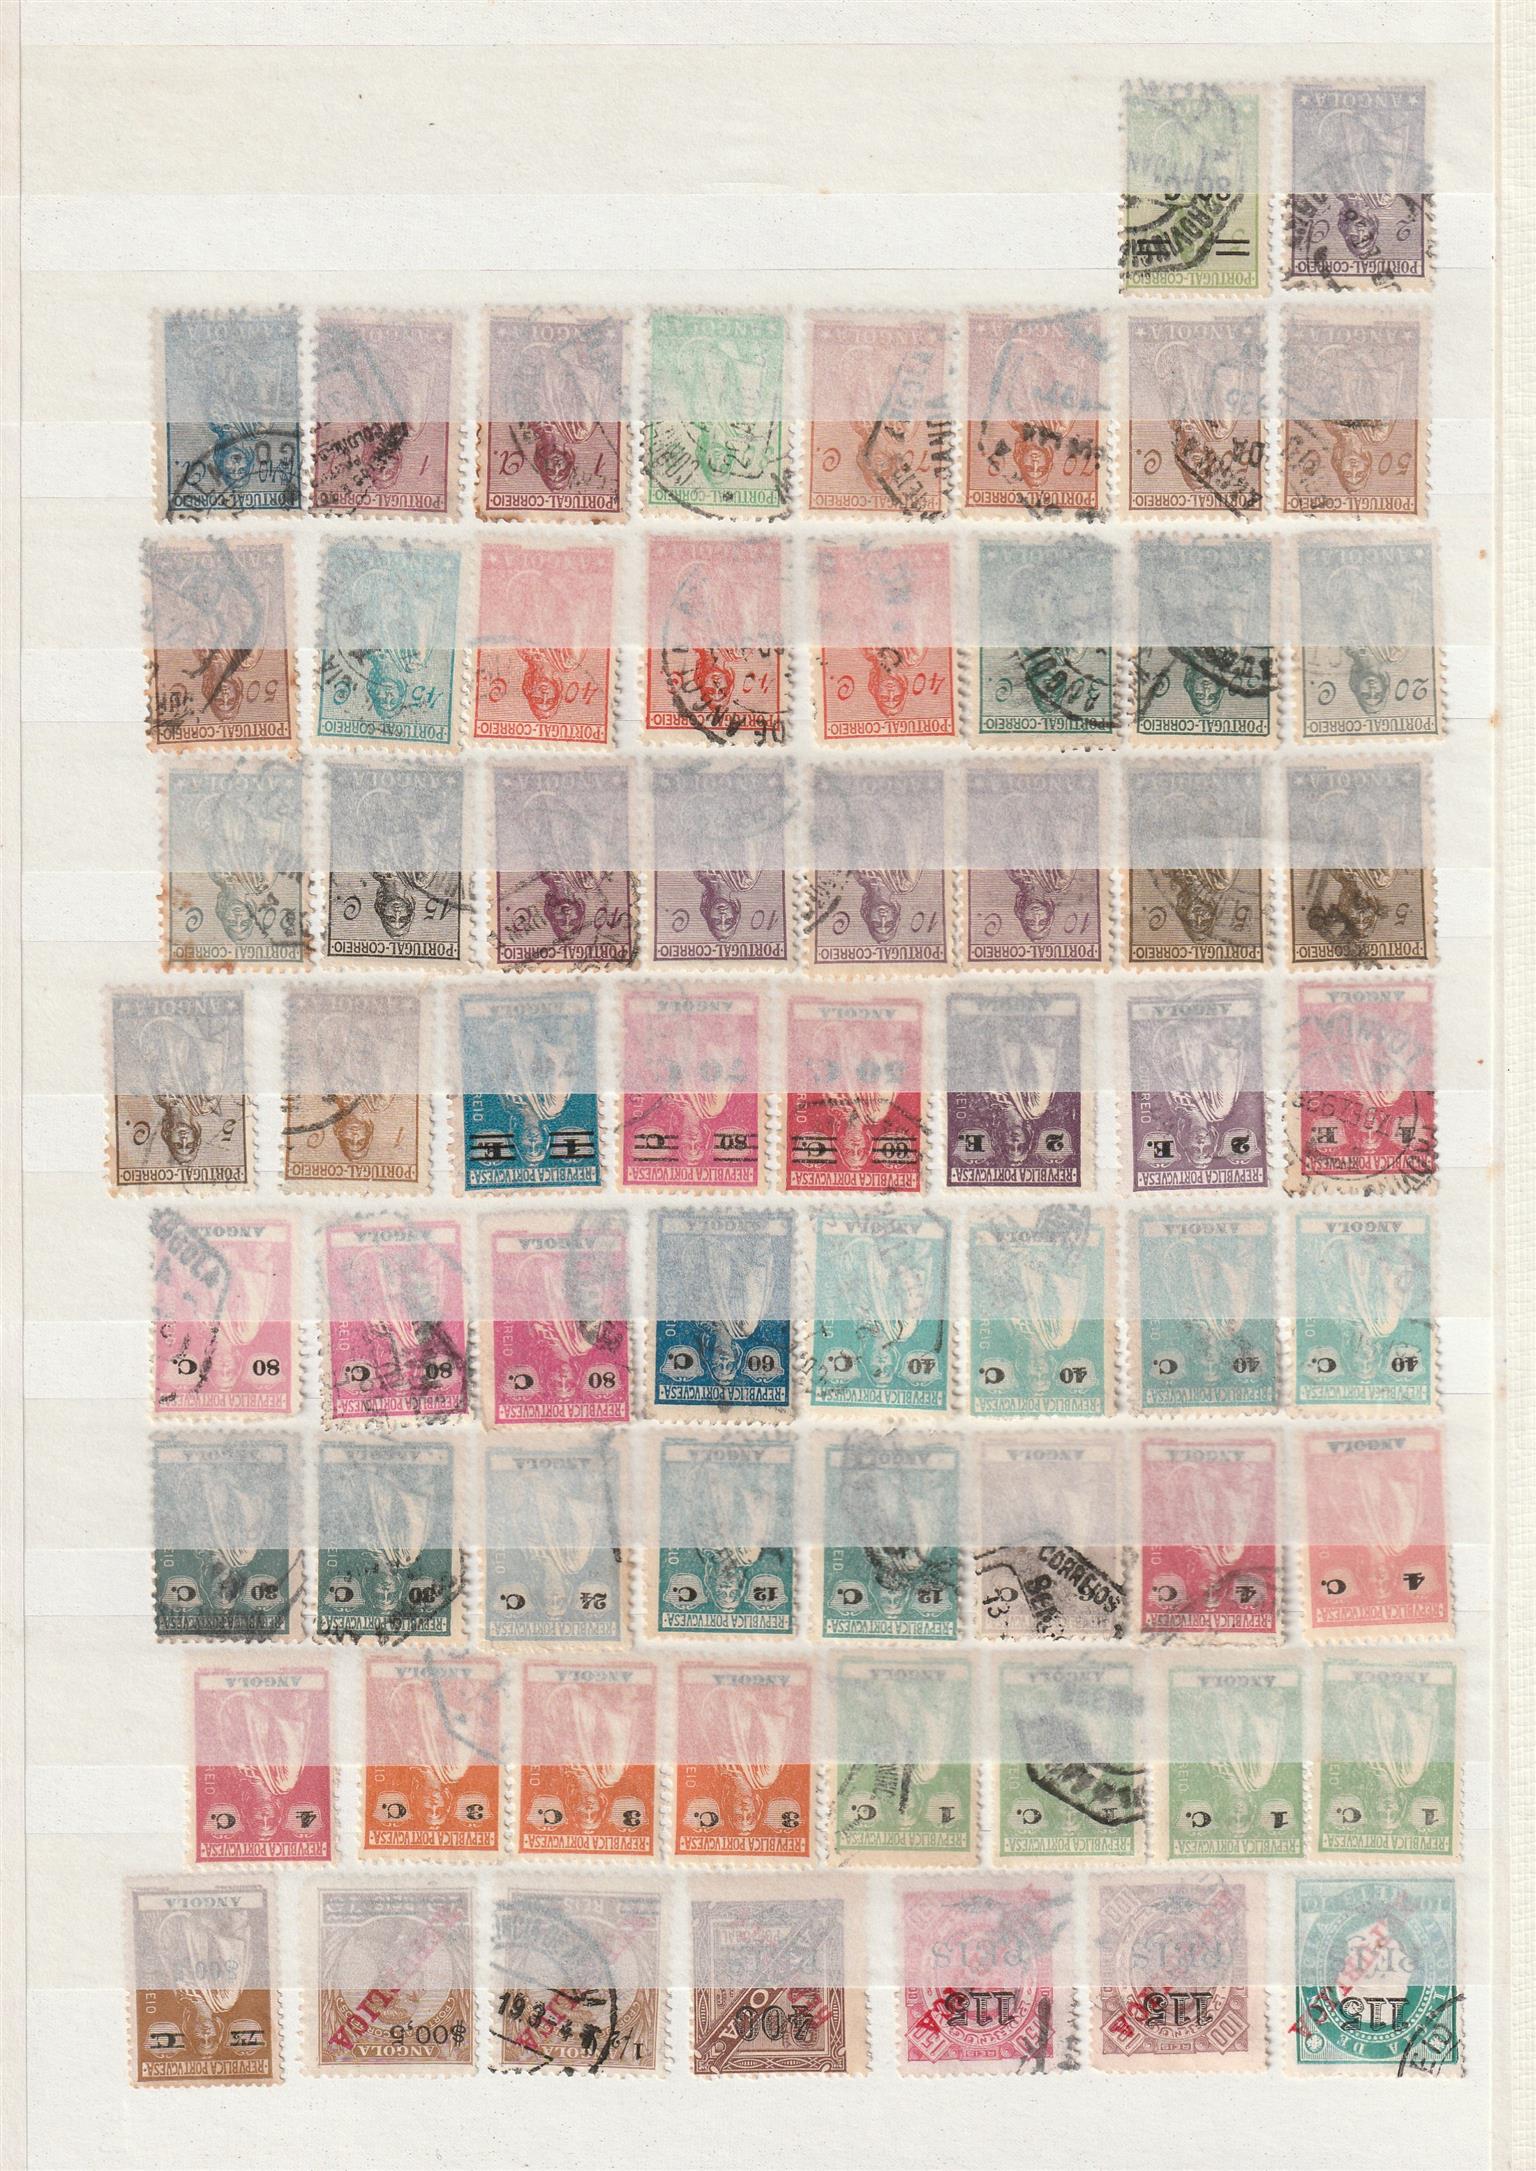 Angola Stamps 1870-2001 (Full Sets, Incomplete Sets, Duplicates, Minisheets)